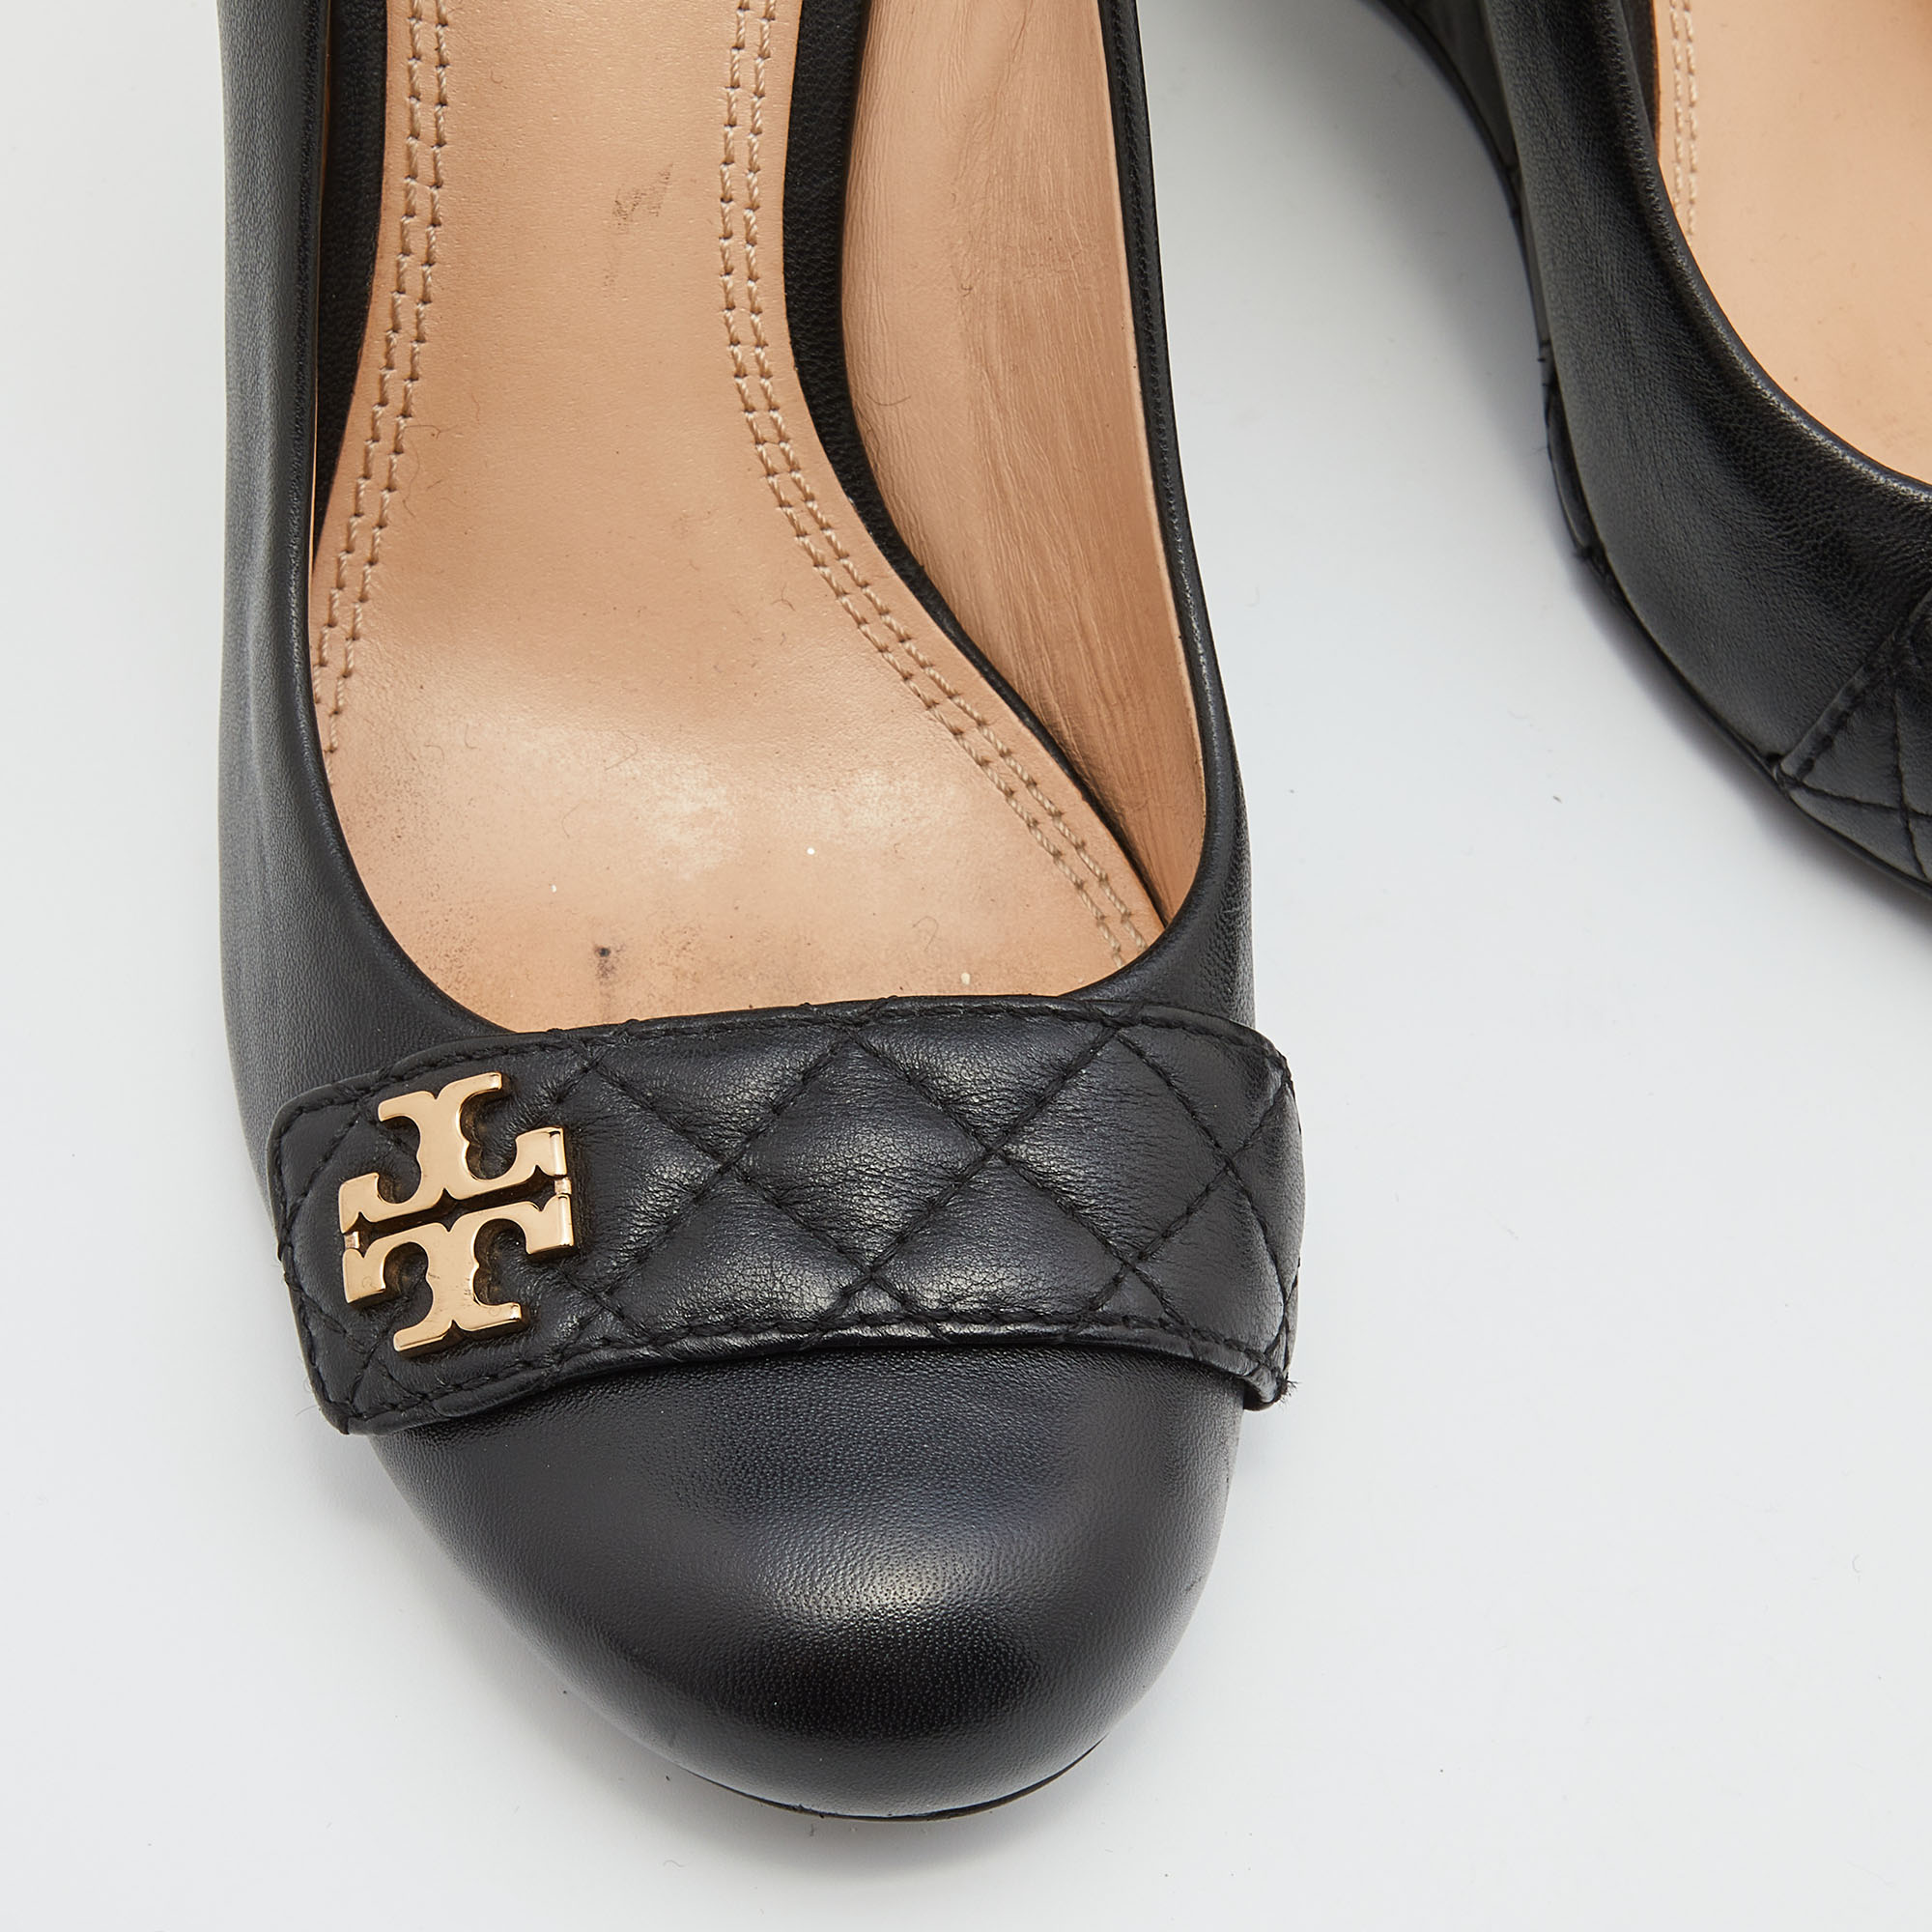 Tory Burch Black Quilted Leather Leila Wedge Pumps Size 40.5